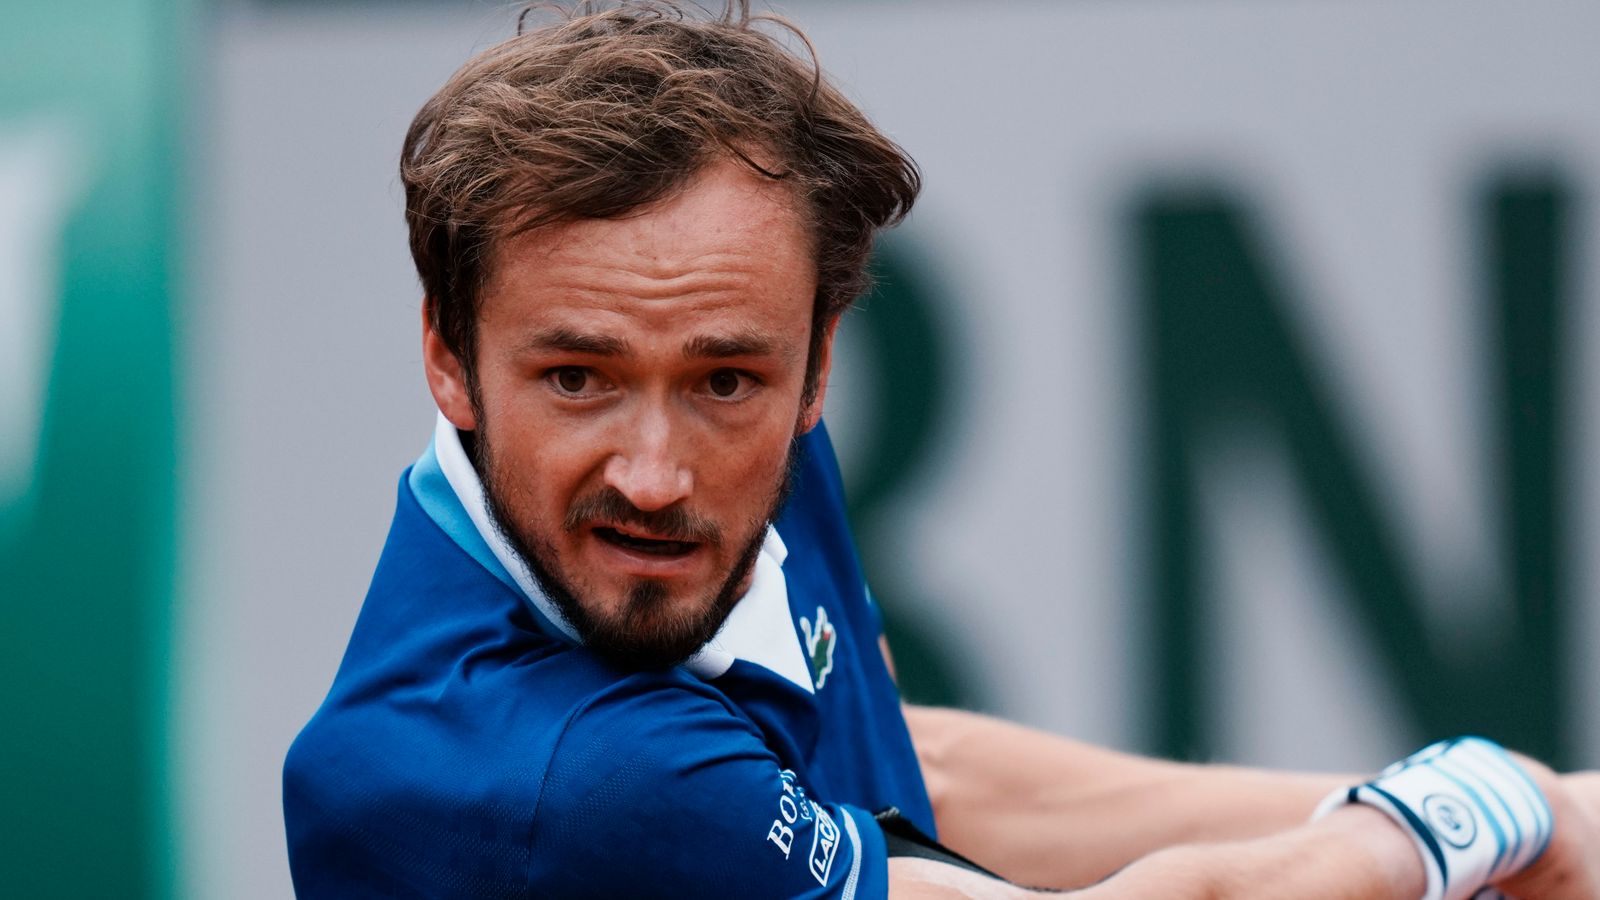 French Open: Daniil Medvedev dominates to march into the fourth round at Roland Garros